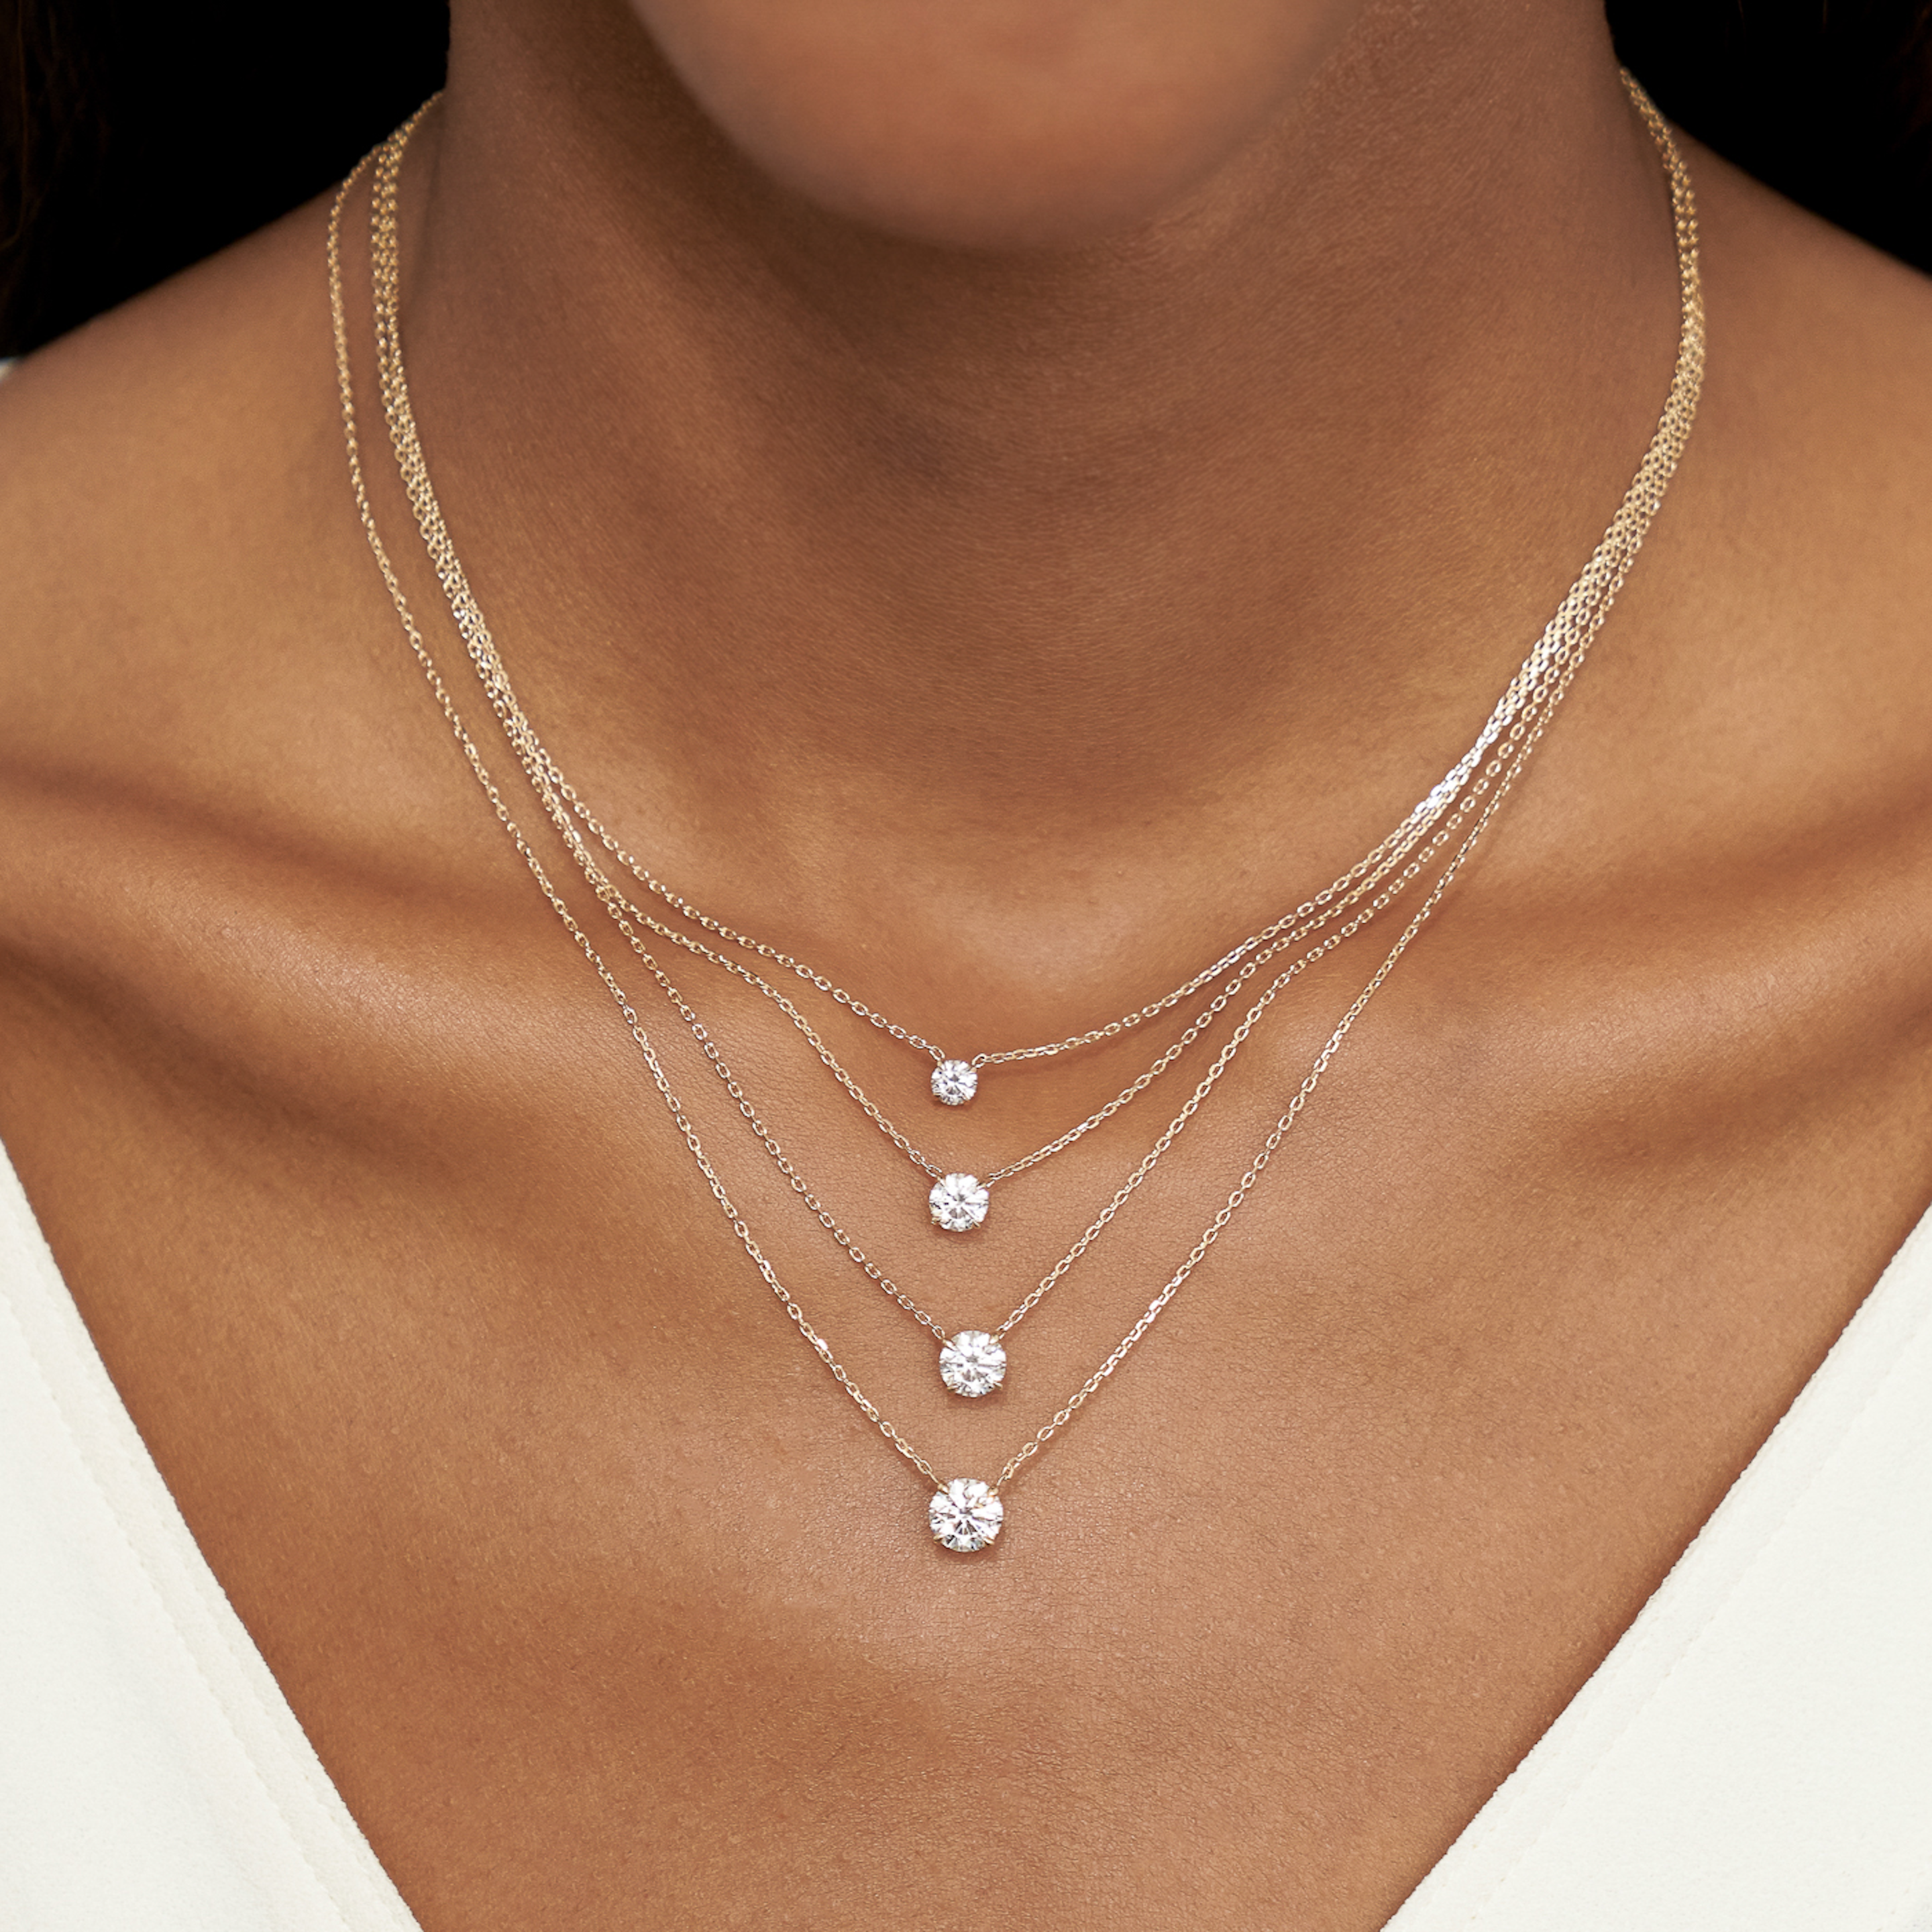 VRAI Solitaire Necklace | Round Brilliant | 14k | 18k Yellow Gold | Carat weight: 1/4